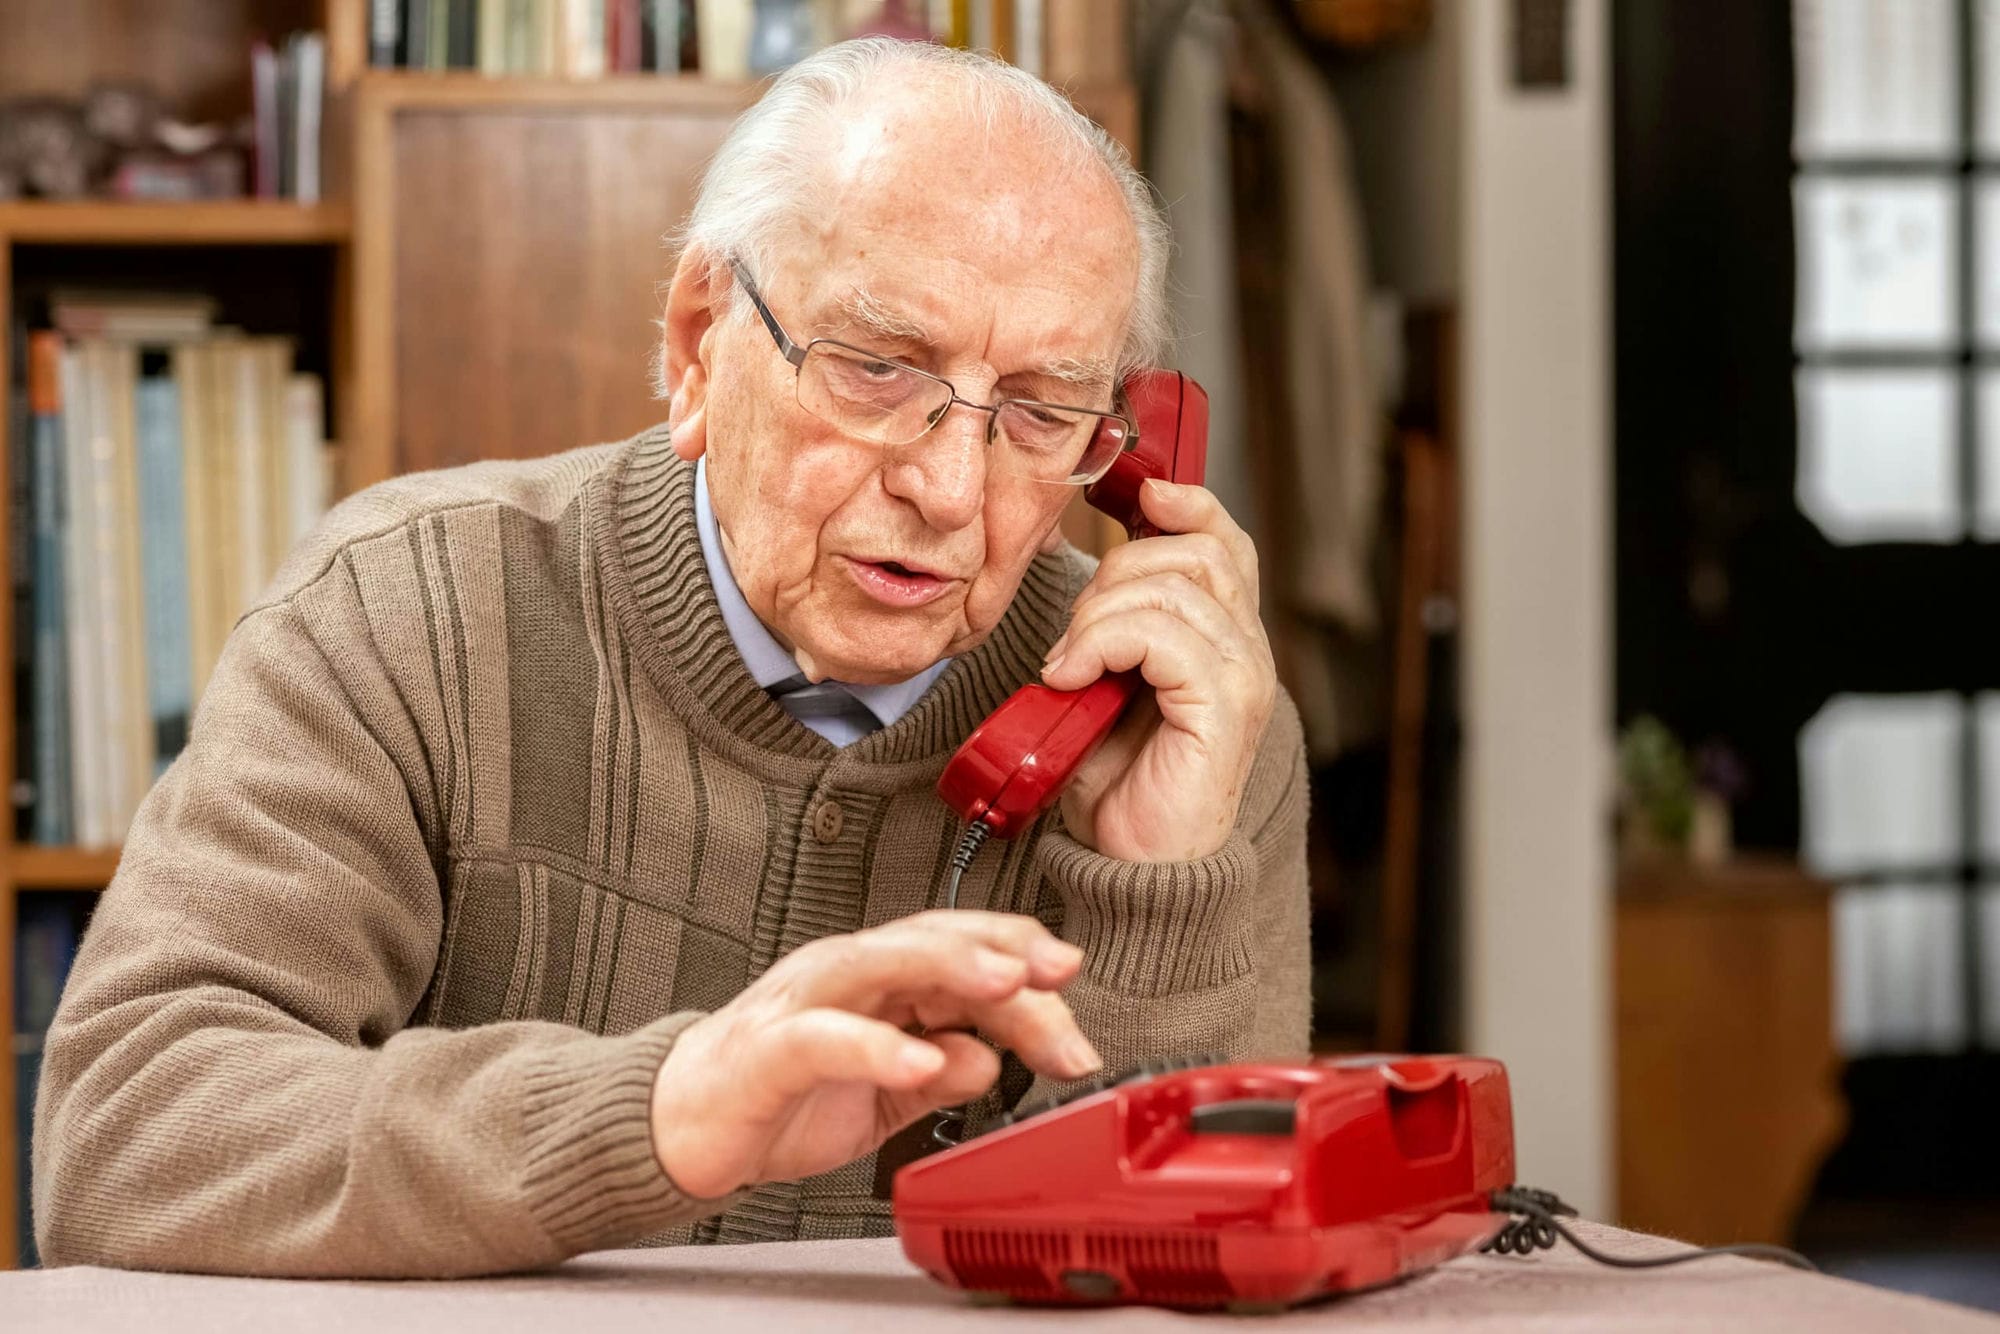 Grandfather with,old,red,button telephone landline phone